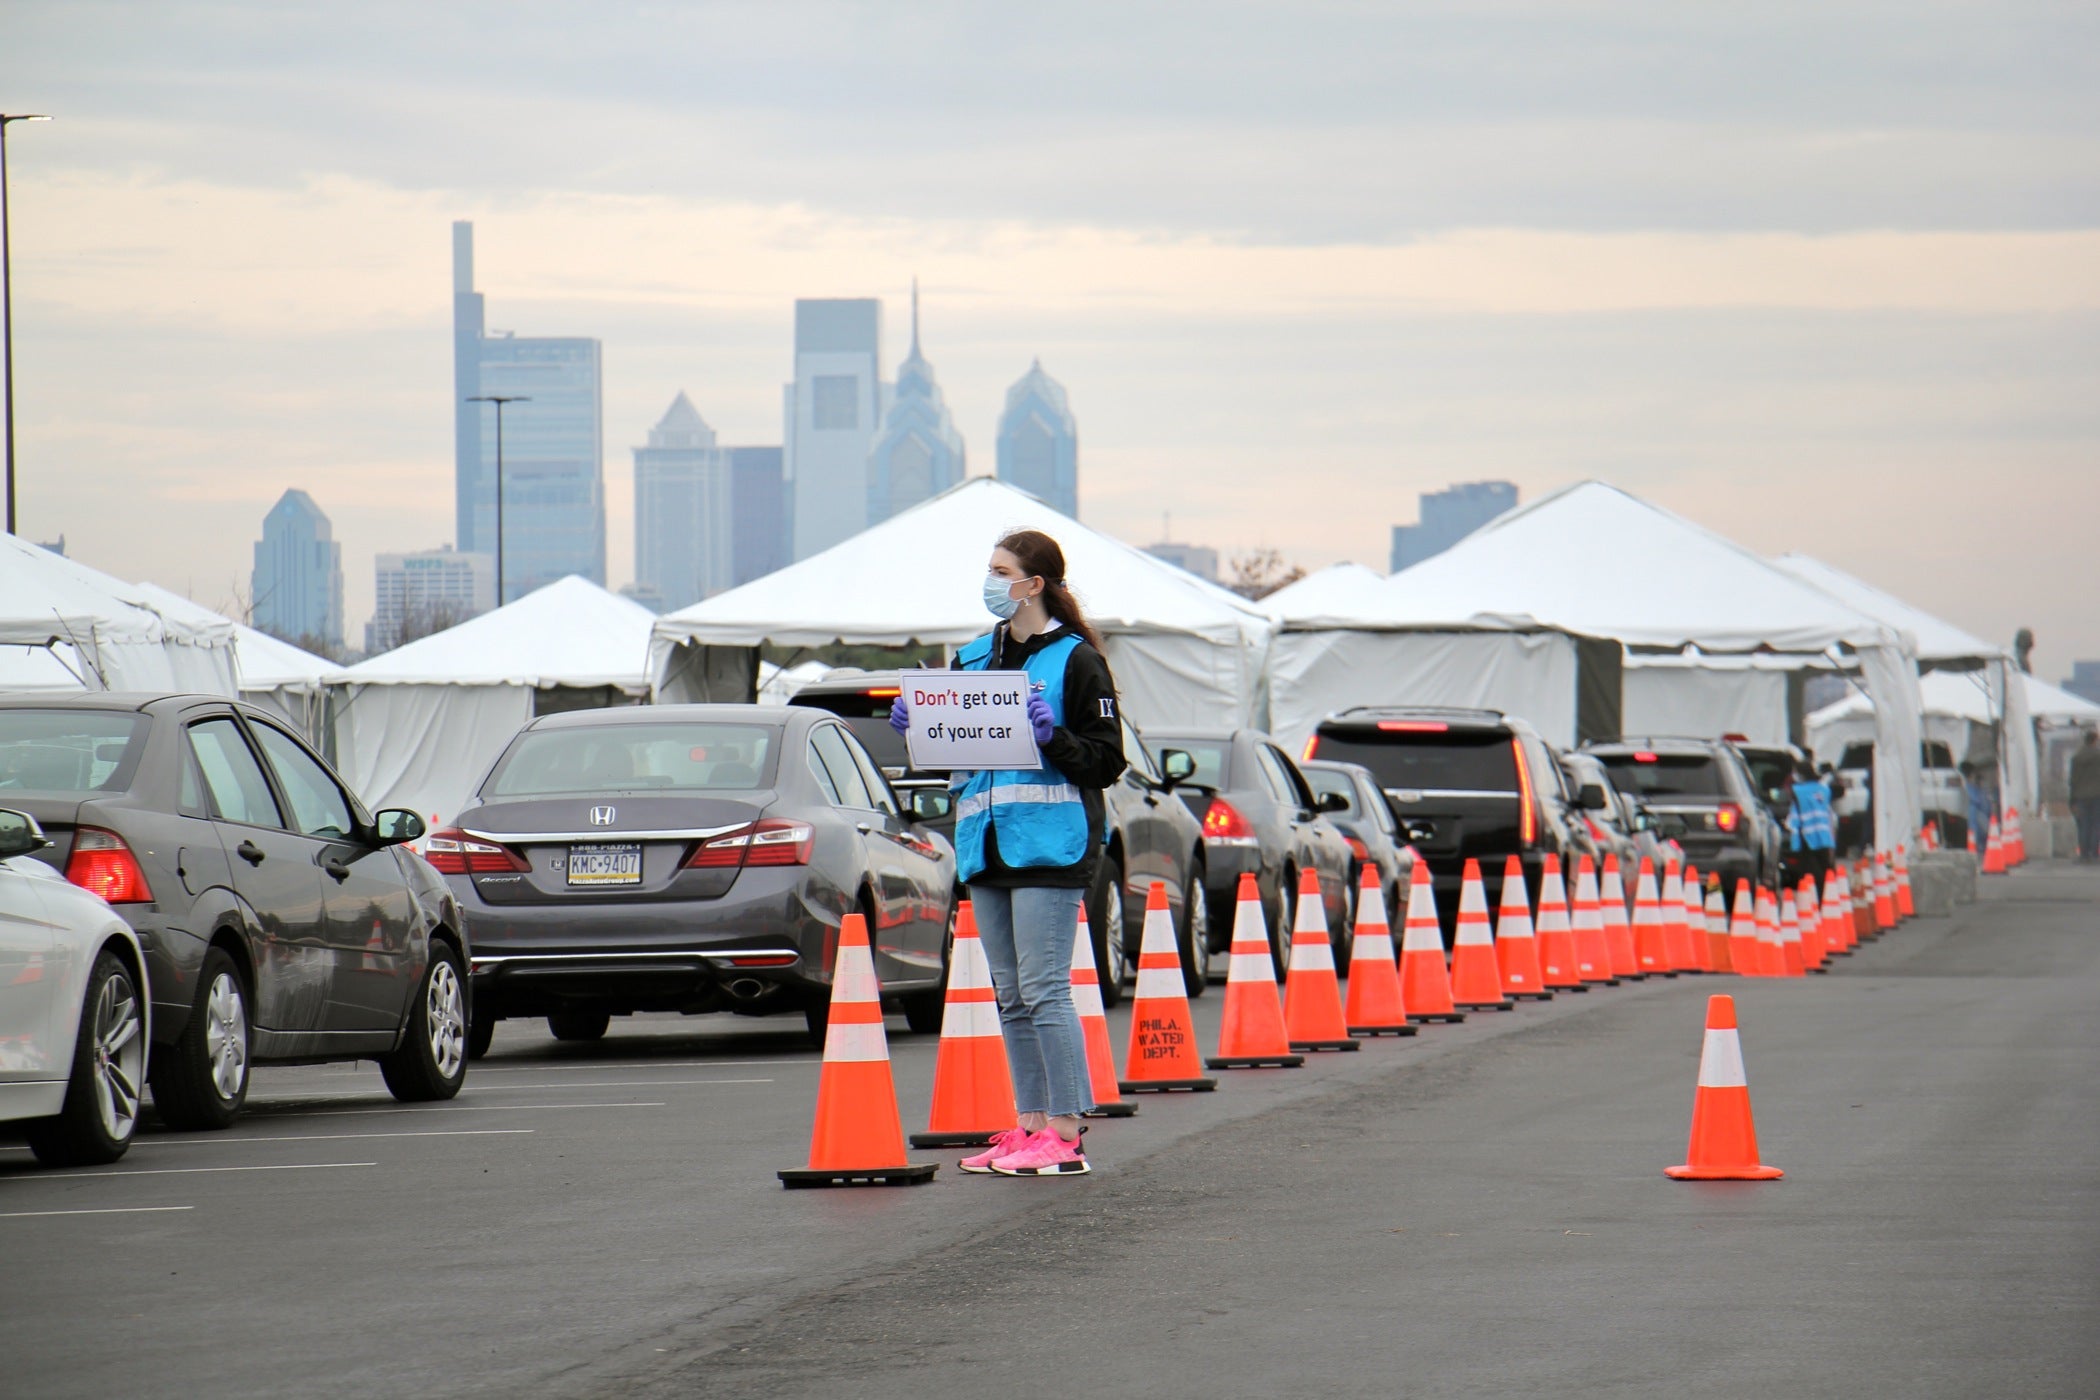 Cars line up at a drive-thru coronavirus test station in the parking lot at Citizens Bank Park.